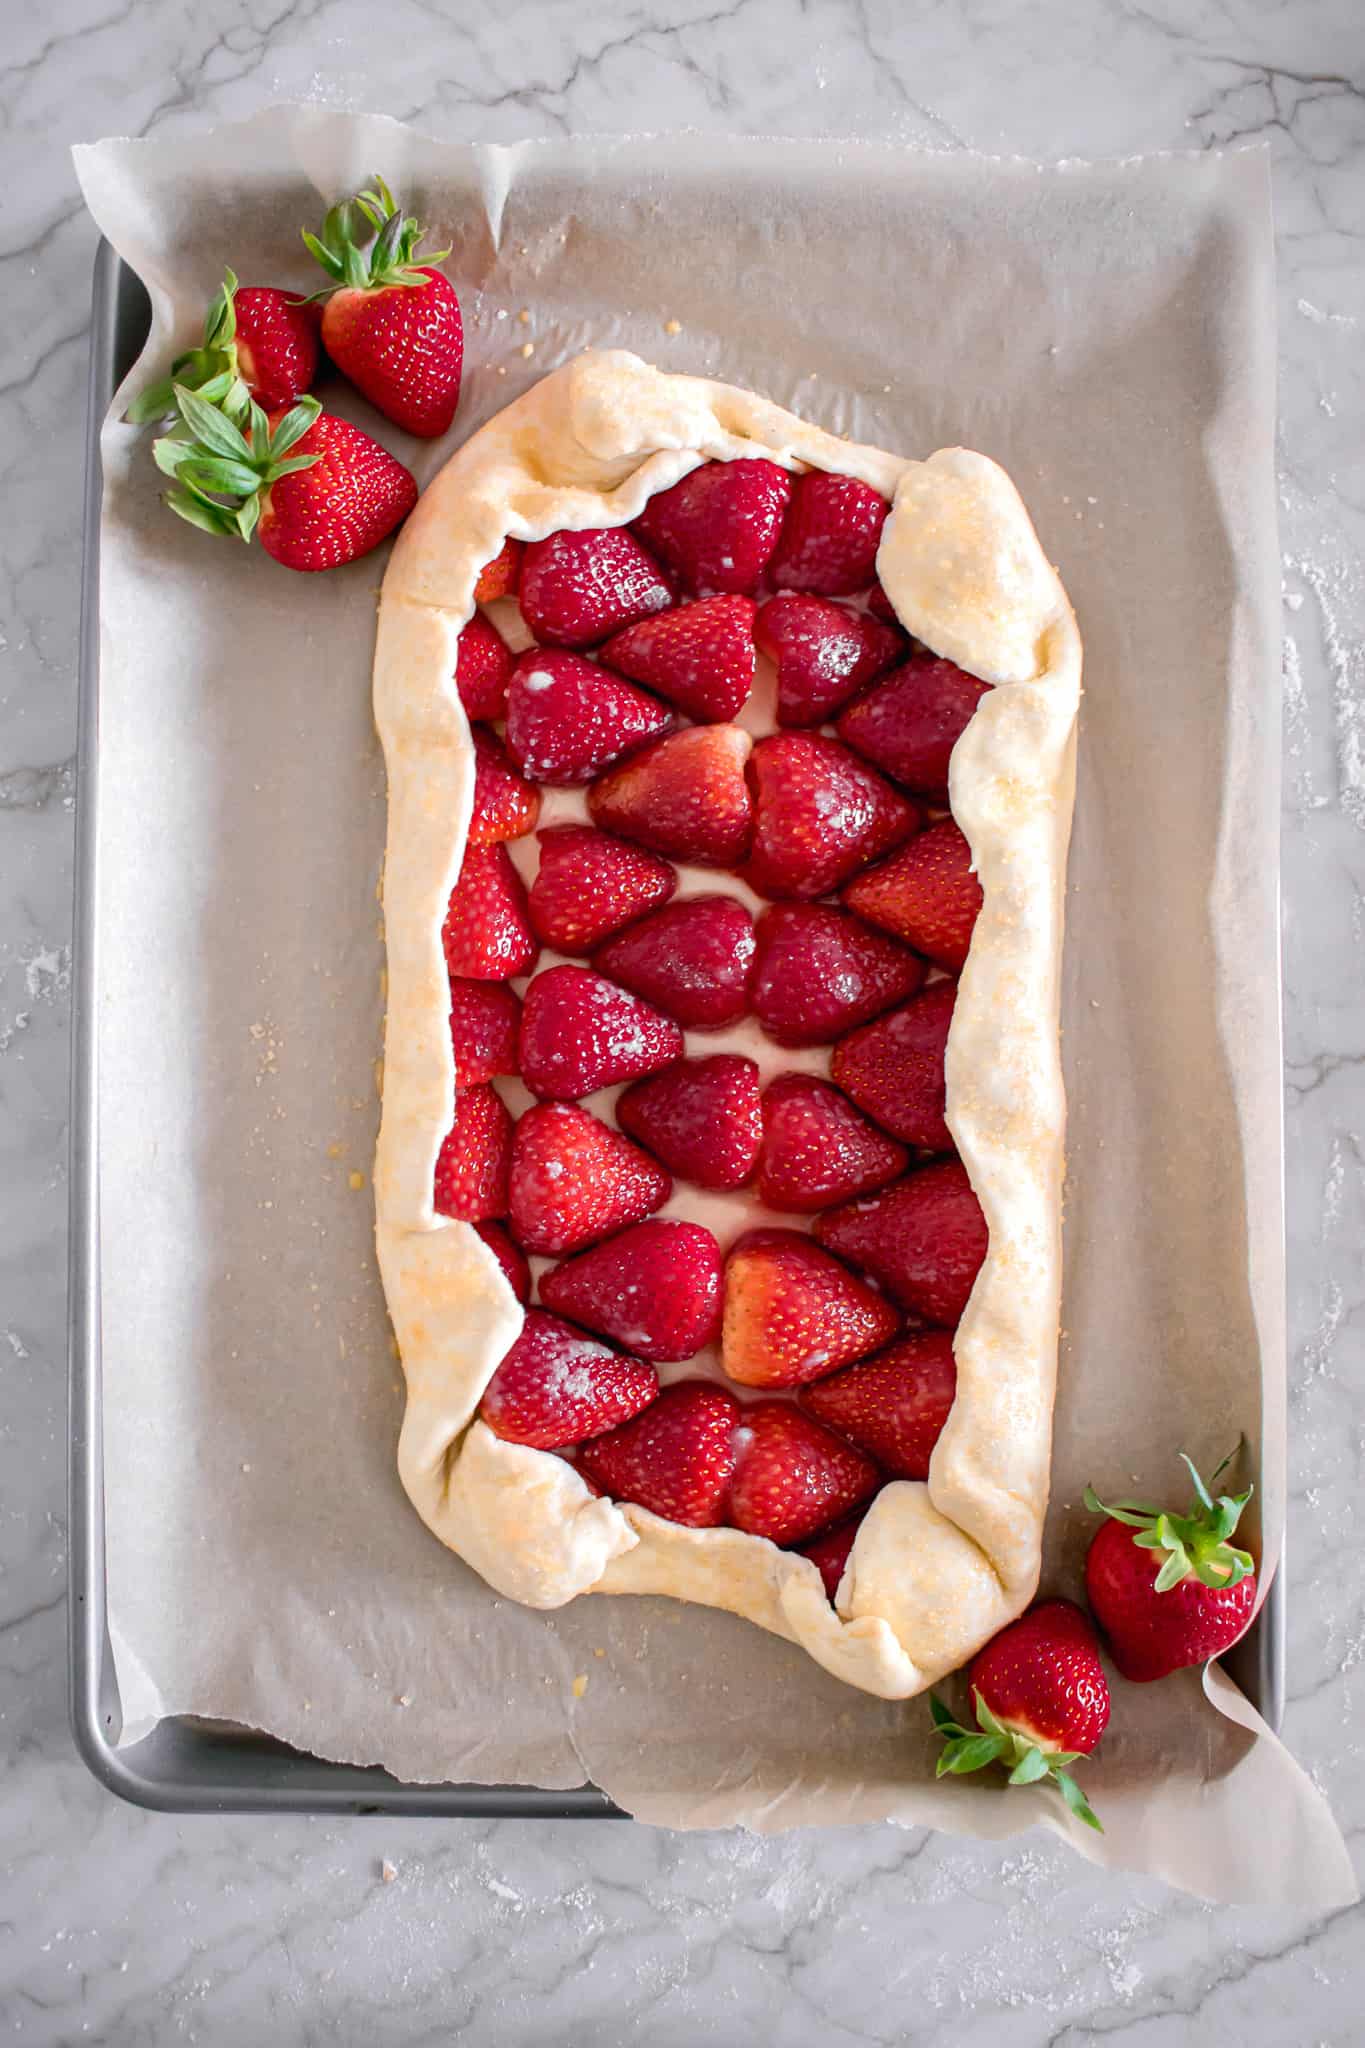 strawberry galette before baking.